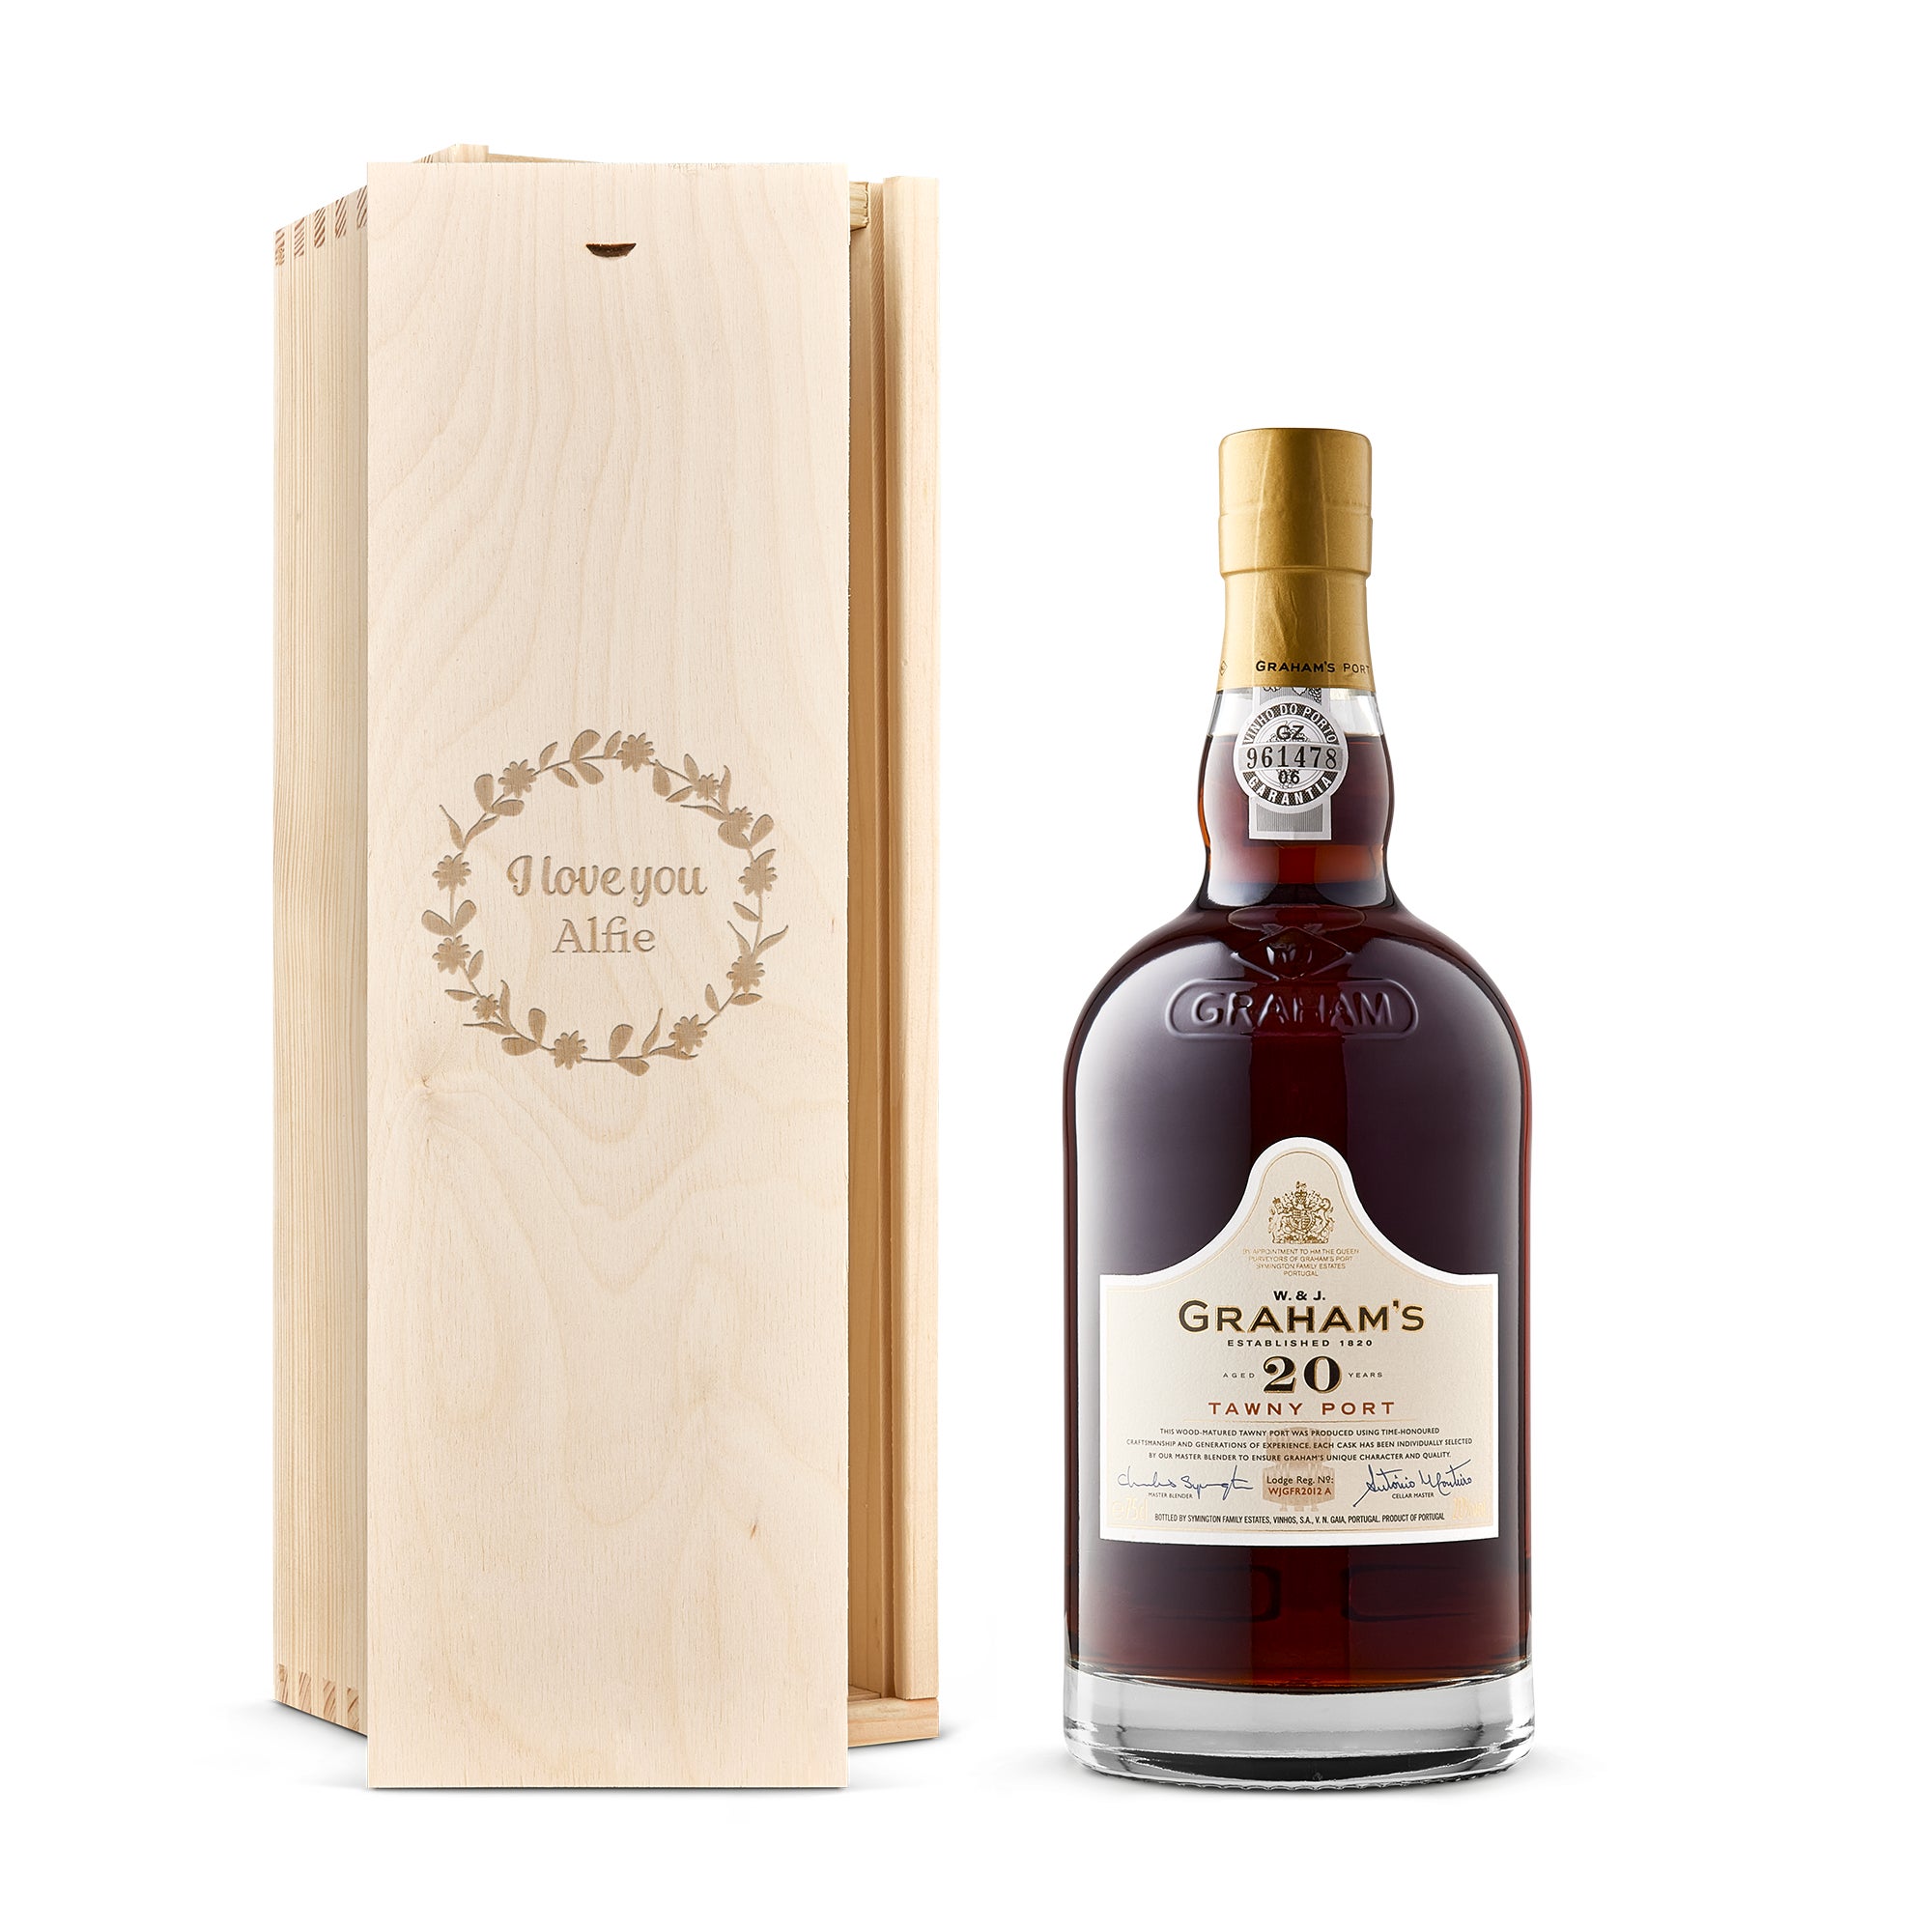 Personalised spirits - Port - Graham's - Tawny - 20 Years - Engraved wooden case